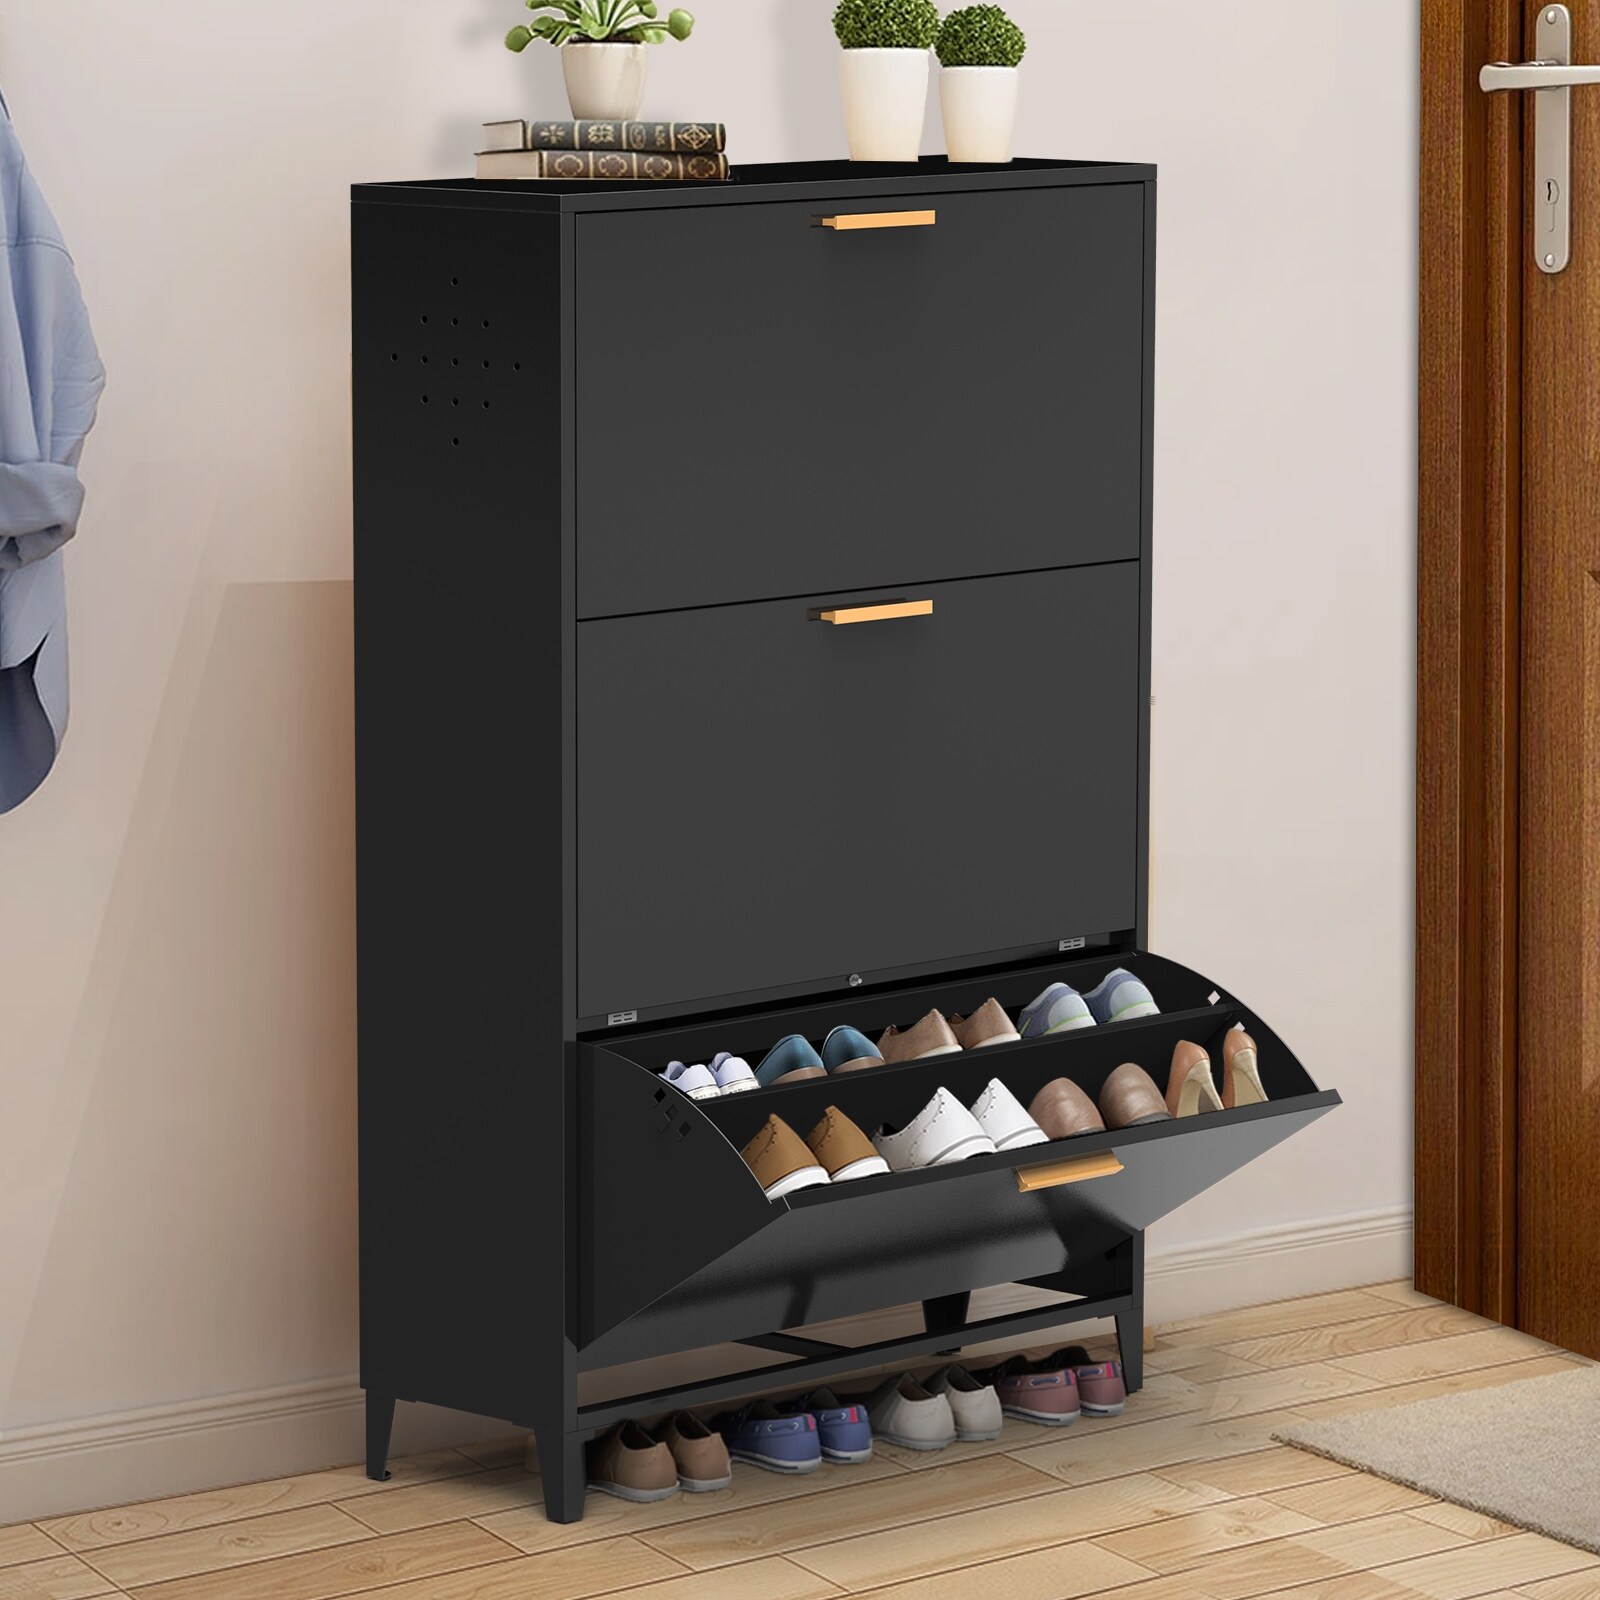 https://ak1.ostkcdn.com/images/products/is/images/direct/49aad1f5e61d4b7d896d15e03a01a9be8e28dd48/3-Drawer-All-Steel-Shoe-Cabinet%2CModern-Tipping-Bucket-Shoe-Cabinet.jpg